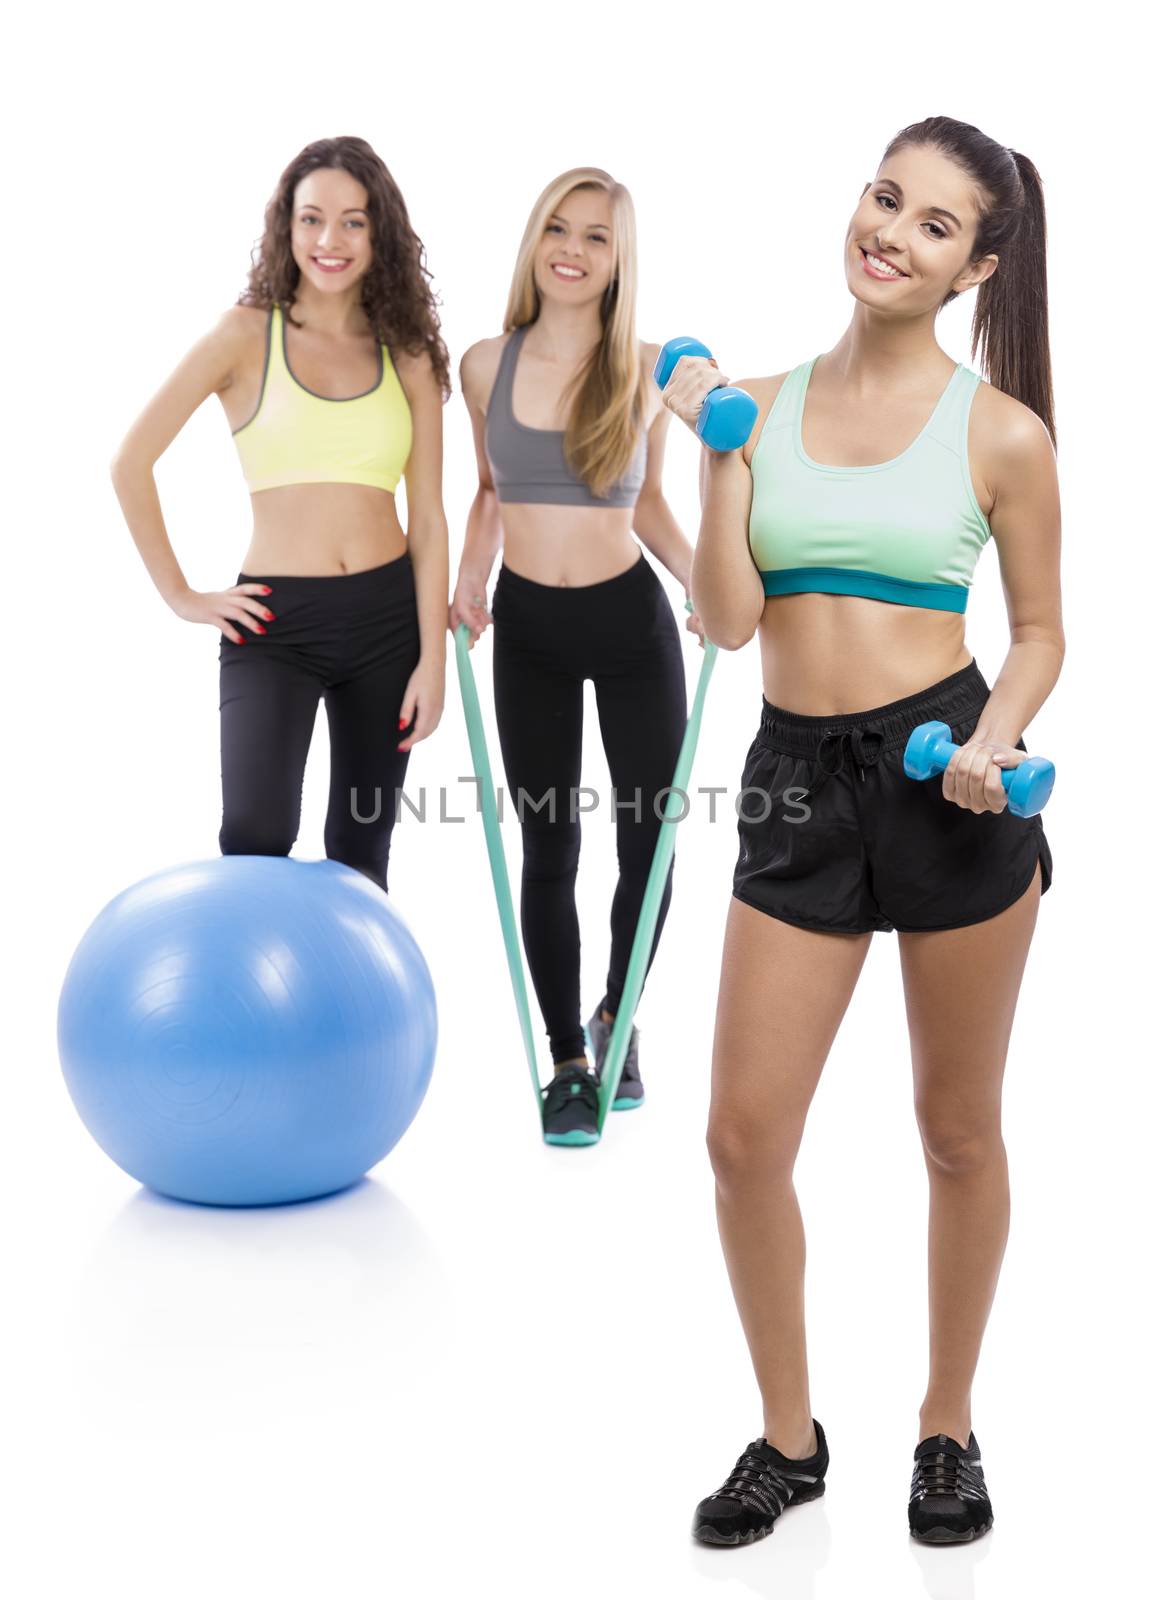 Girls in the Gym by Iko